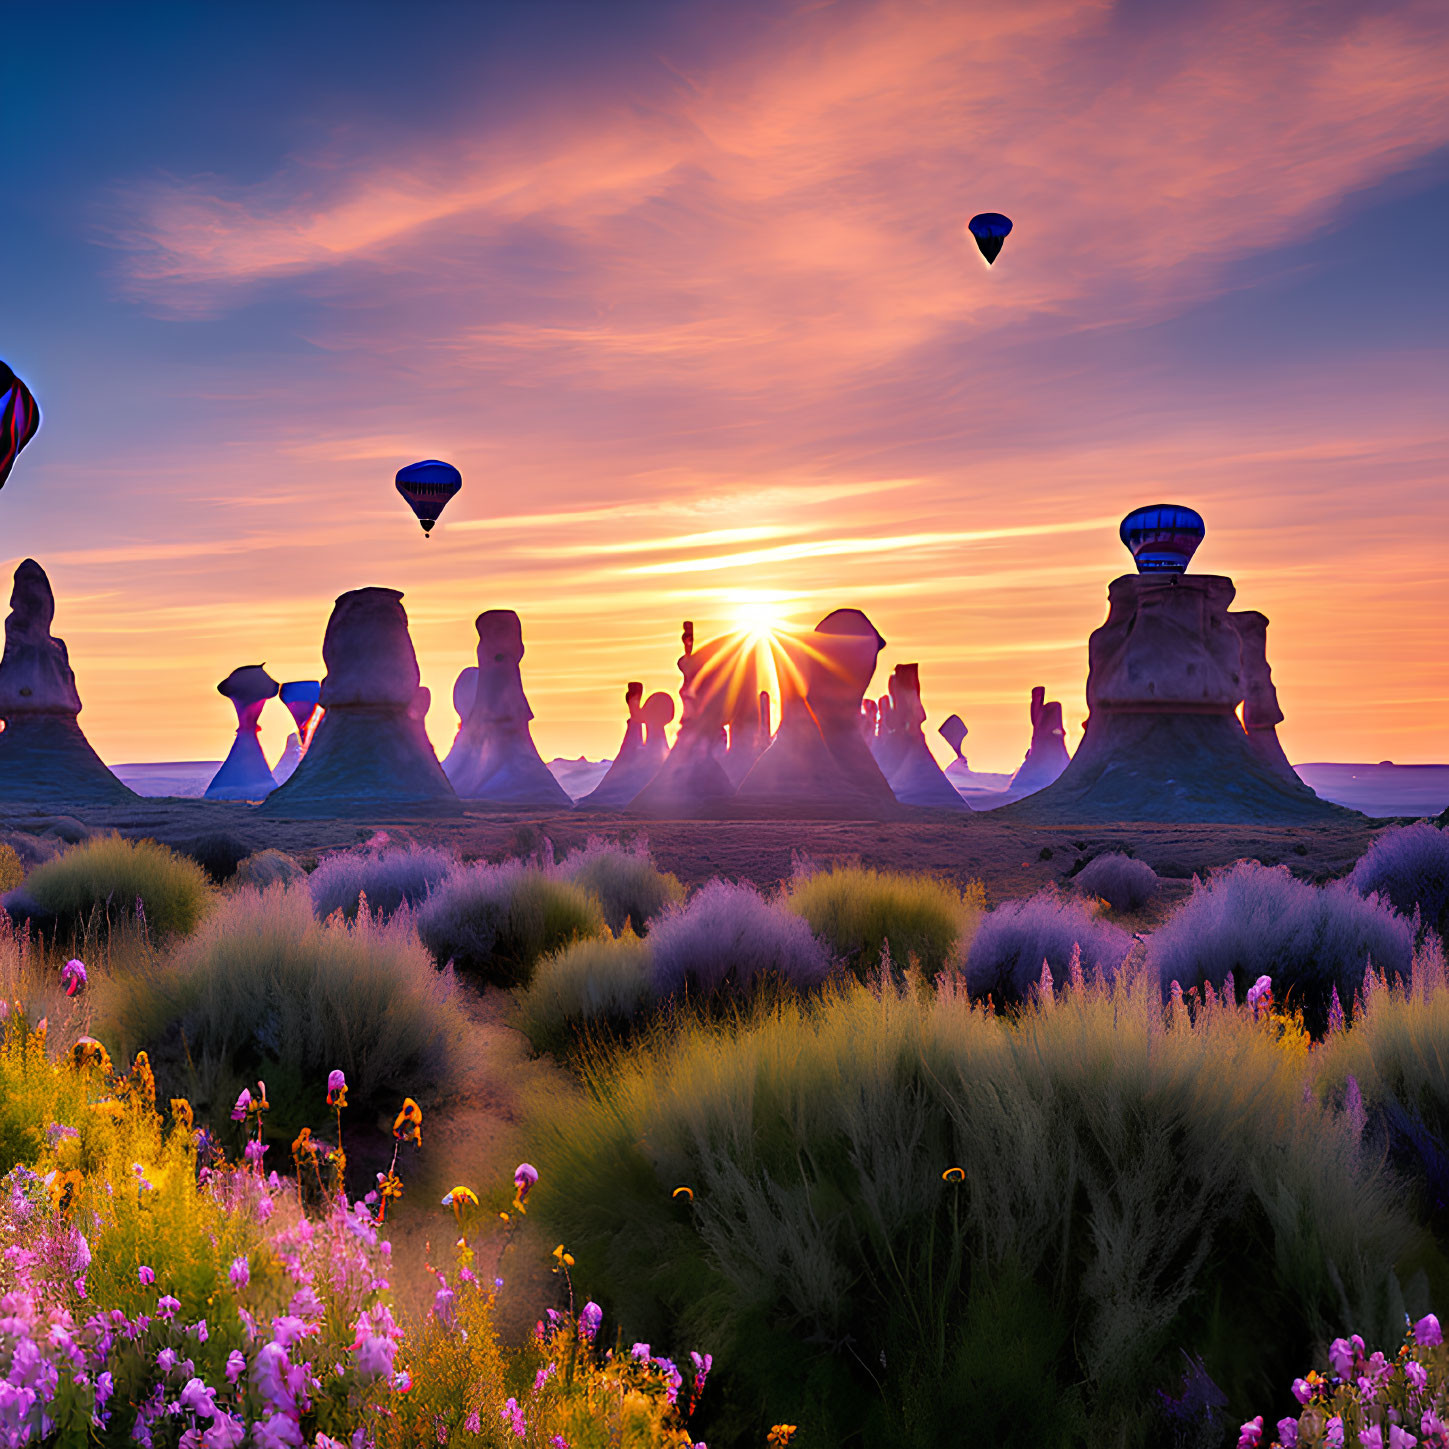 Colorful hot air balloons soar over majestic rock formations and vibrant wildflowers at sunrise